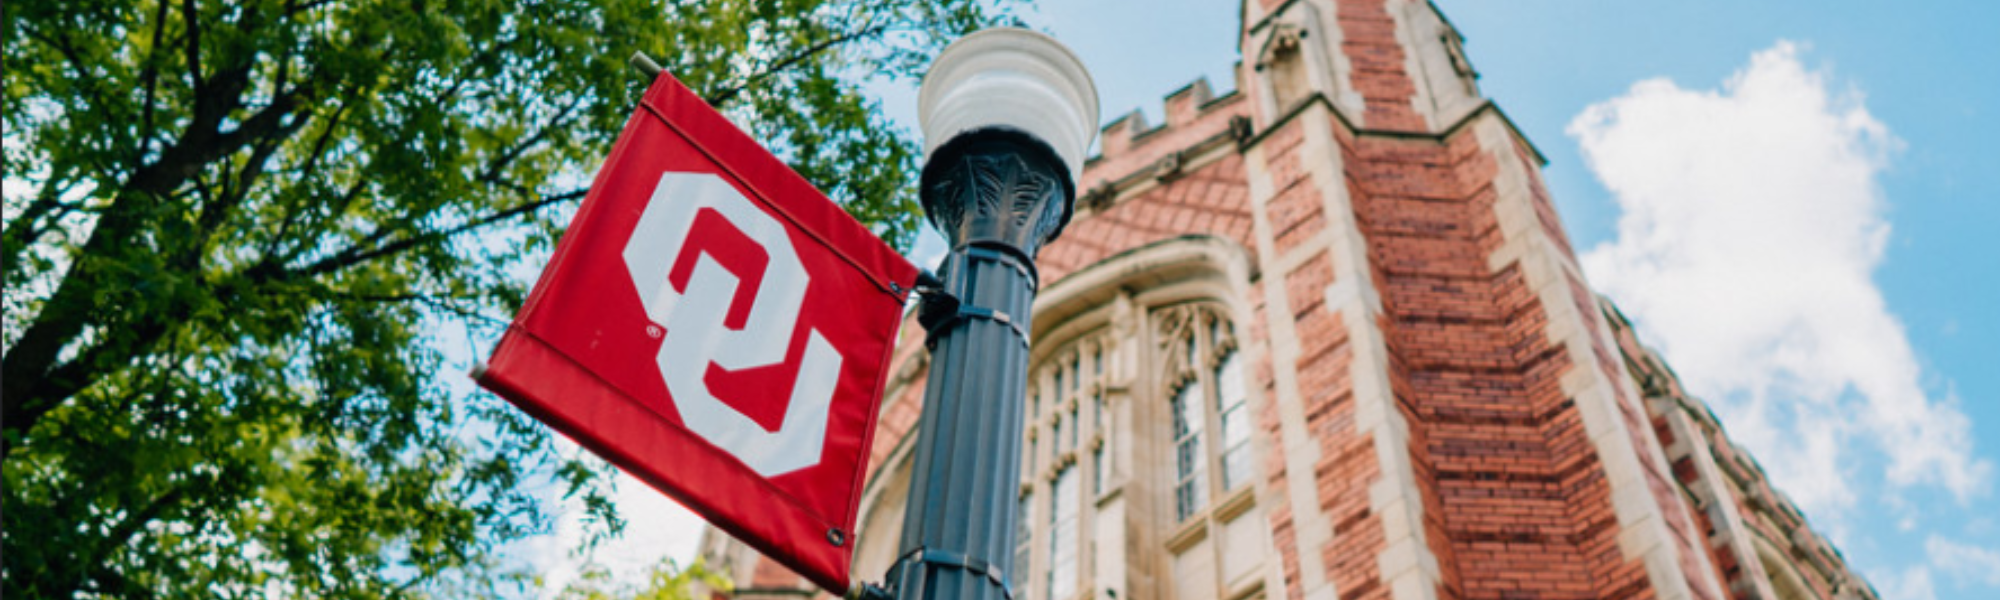 Photo of Evans Hall and OU lamppost.